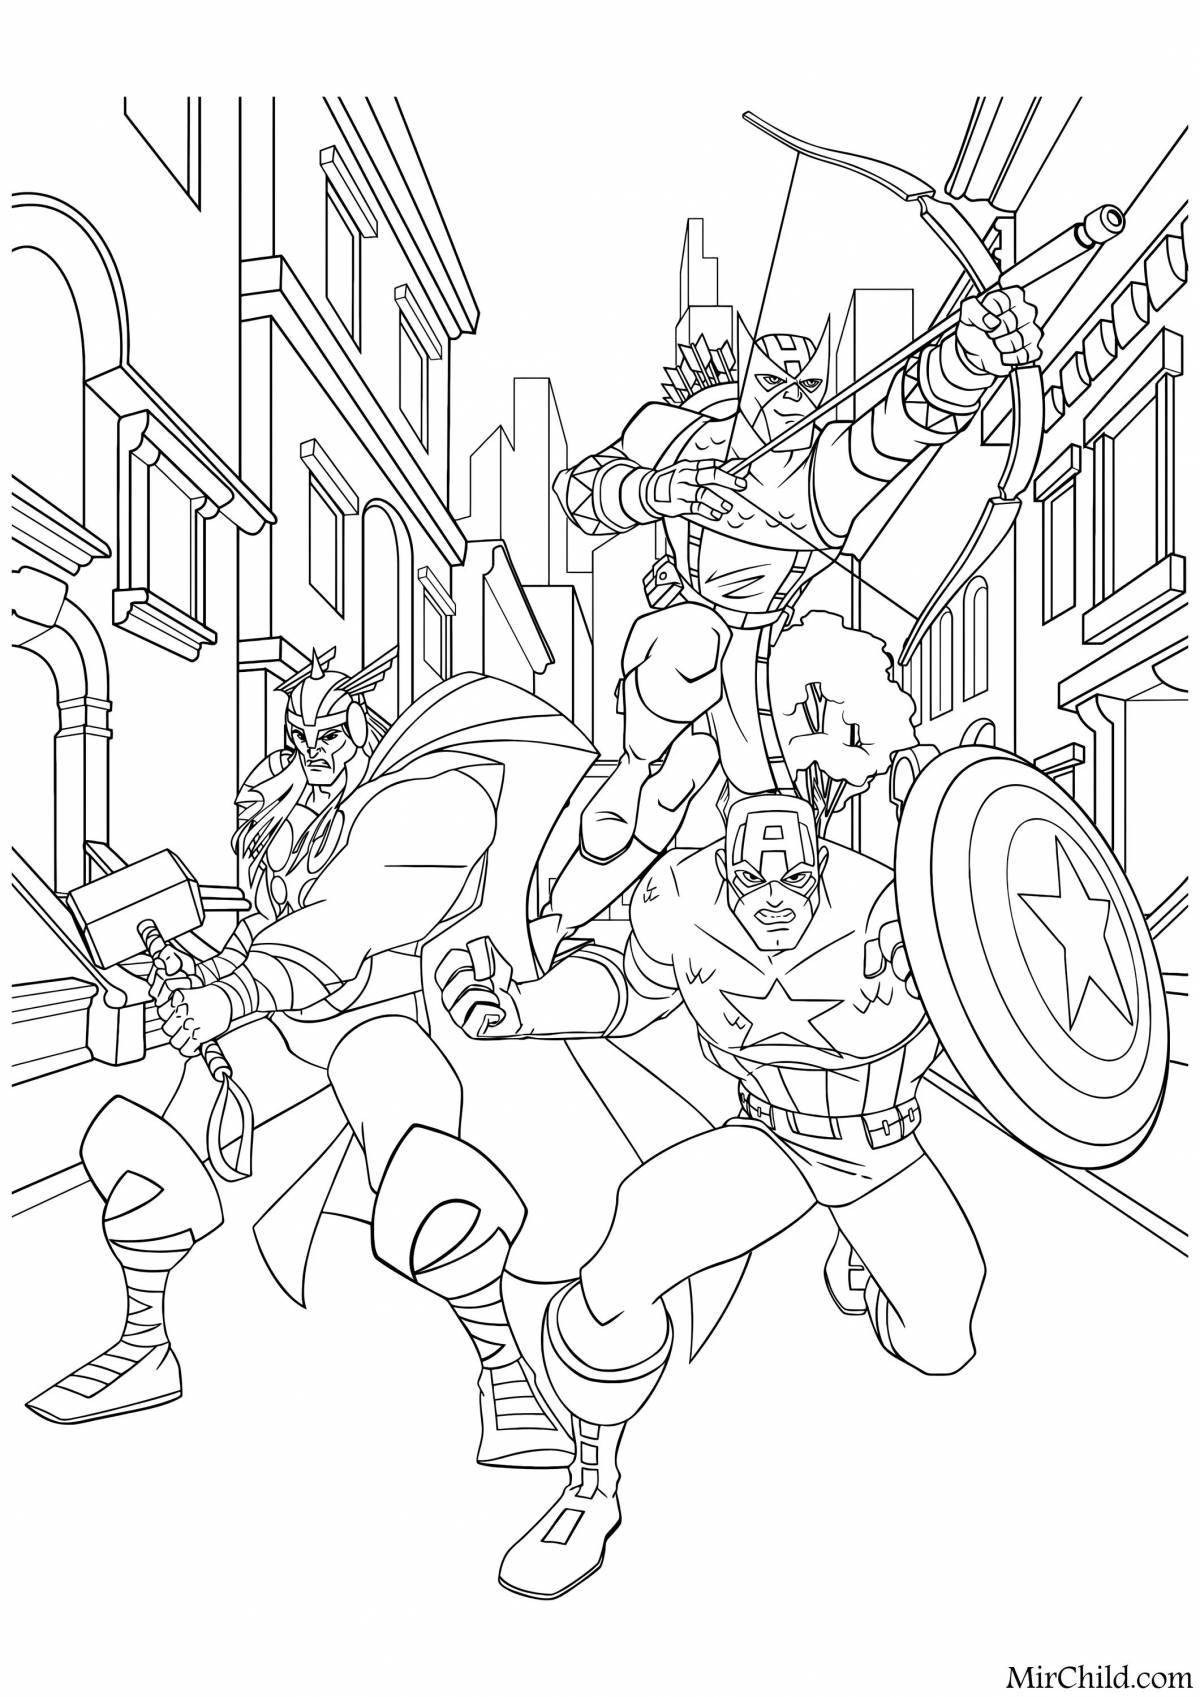 Glorious Thor coloring pages for kids